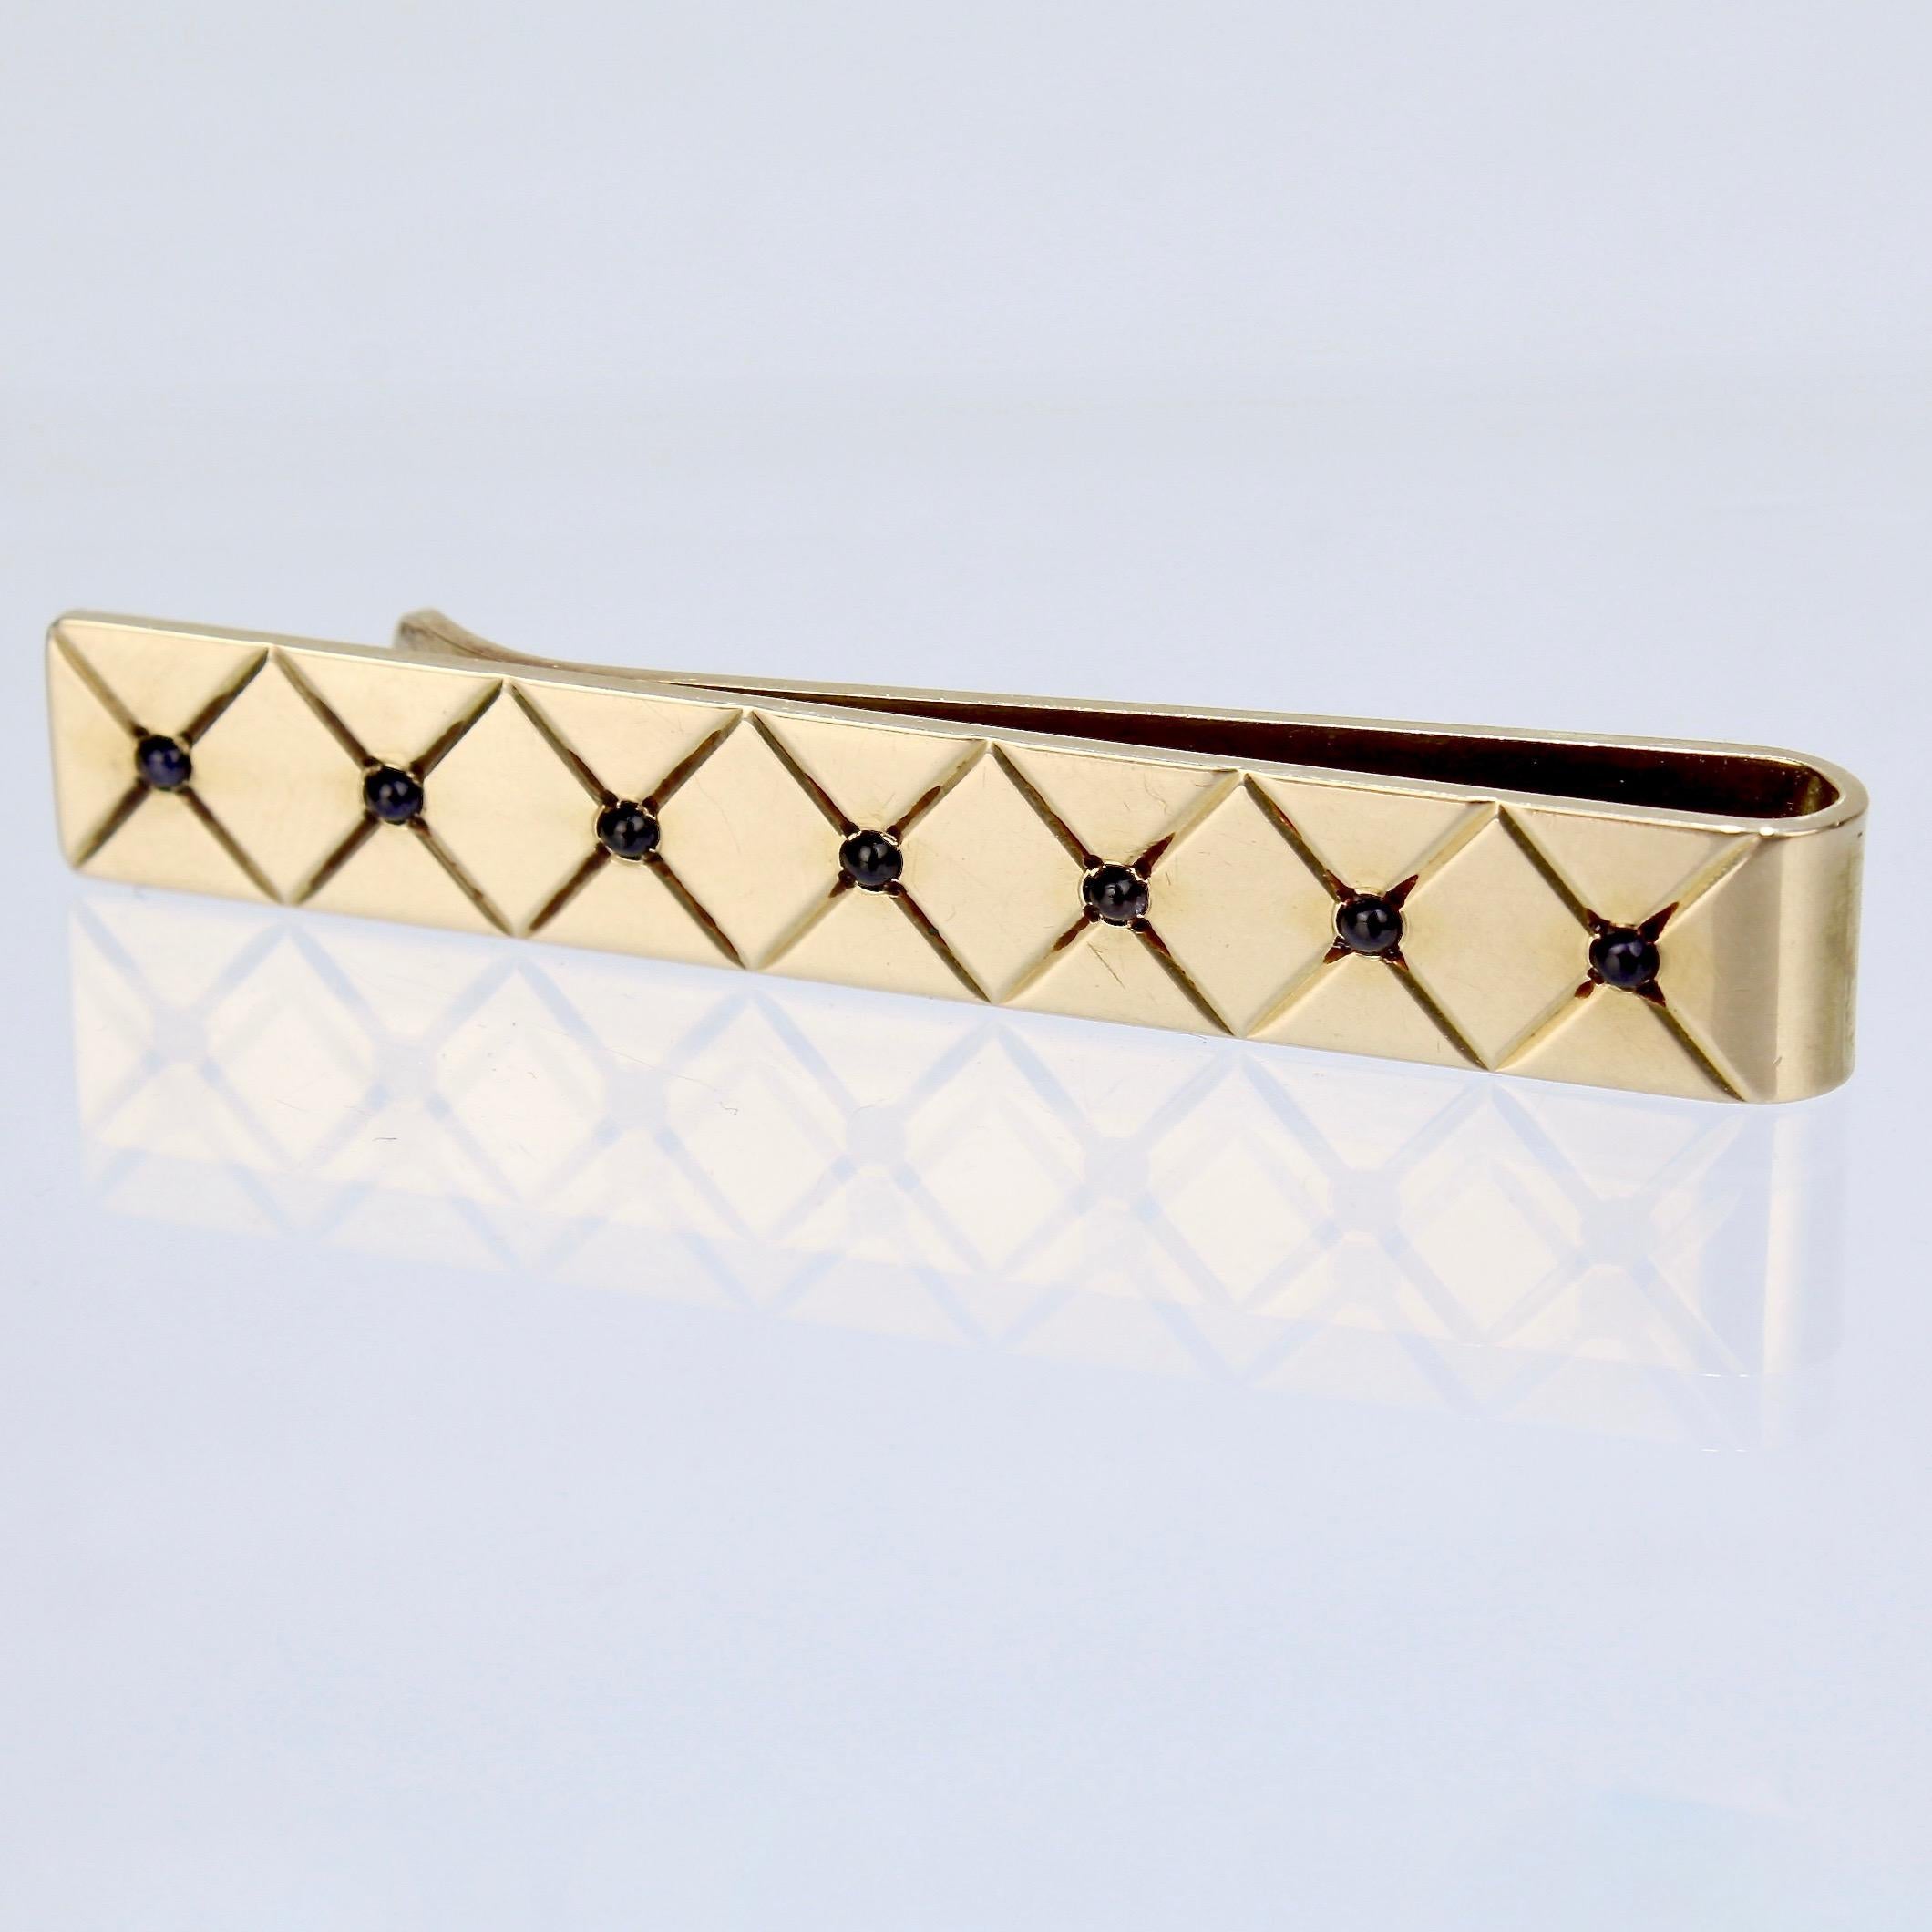 cartier gold tie pin